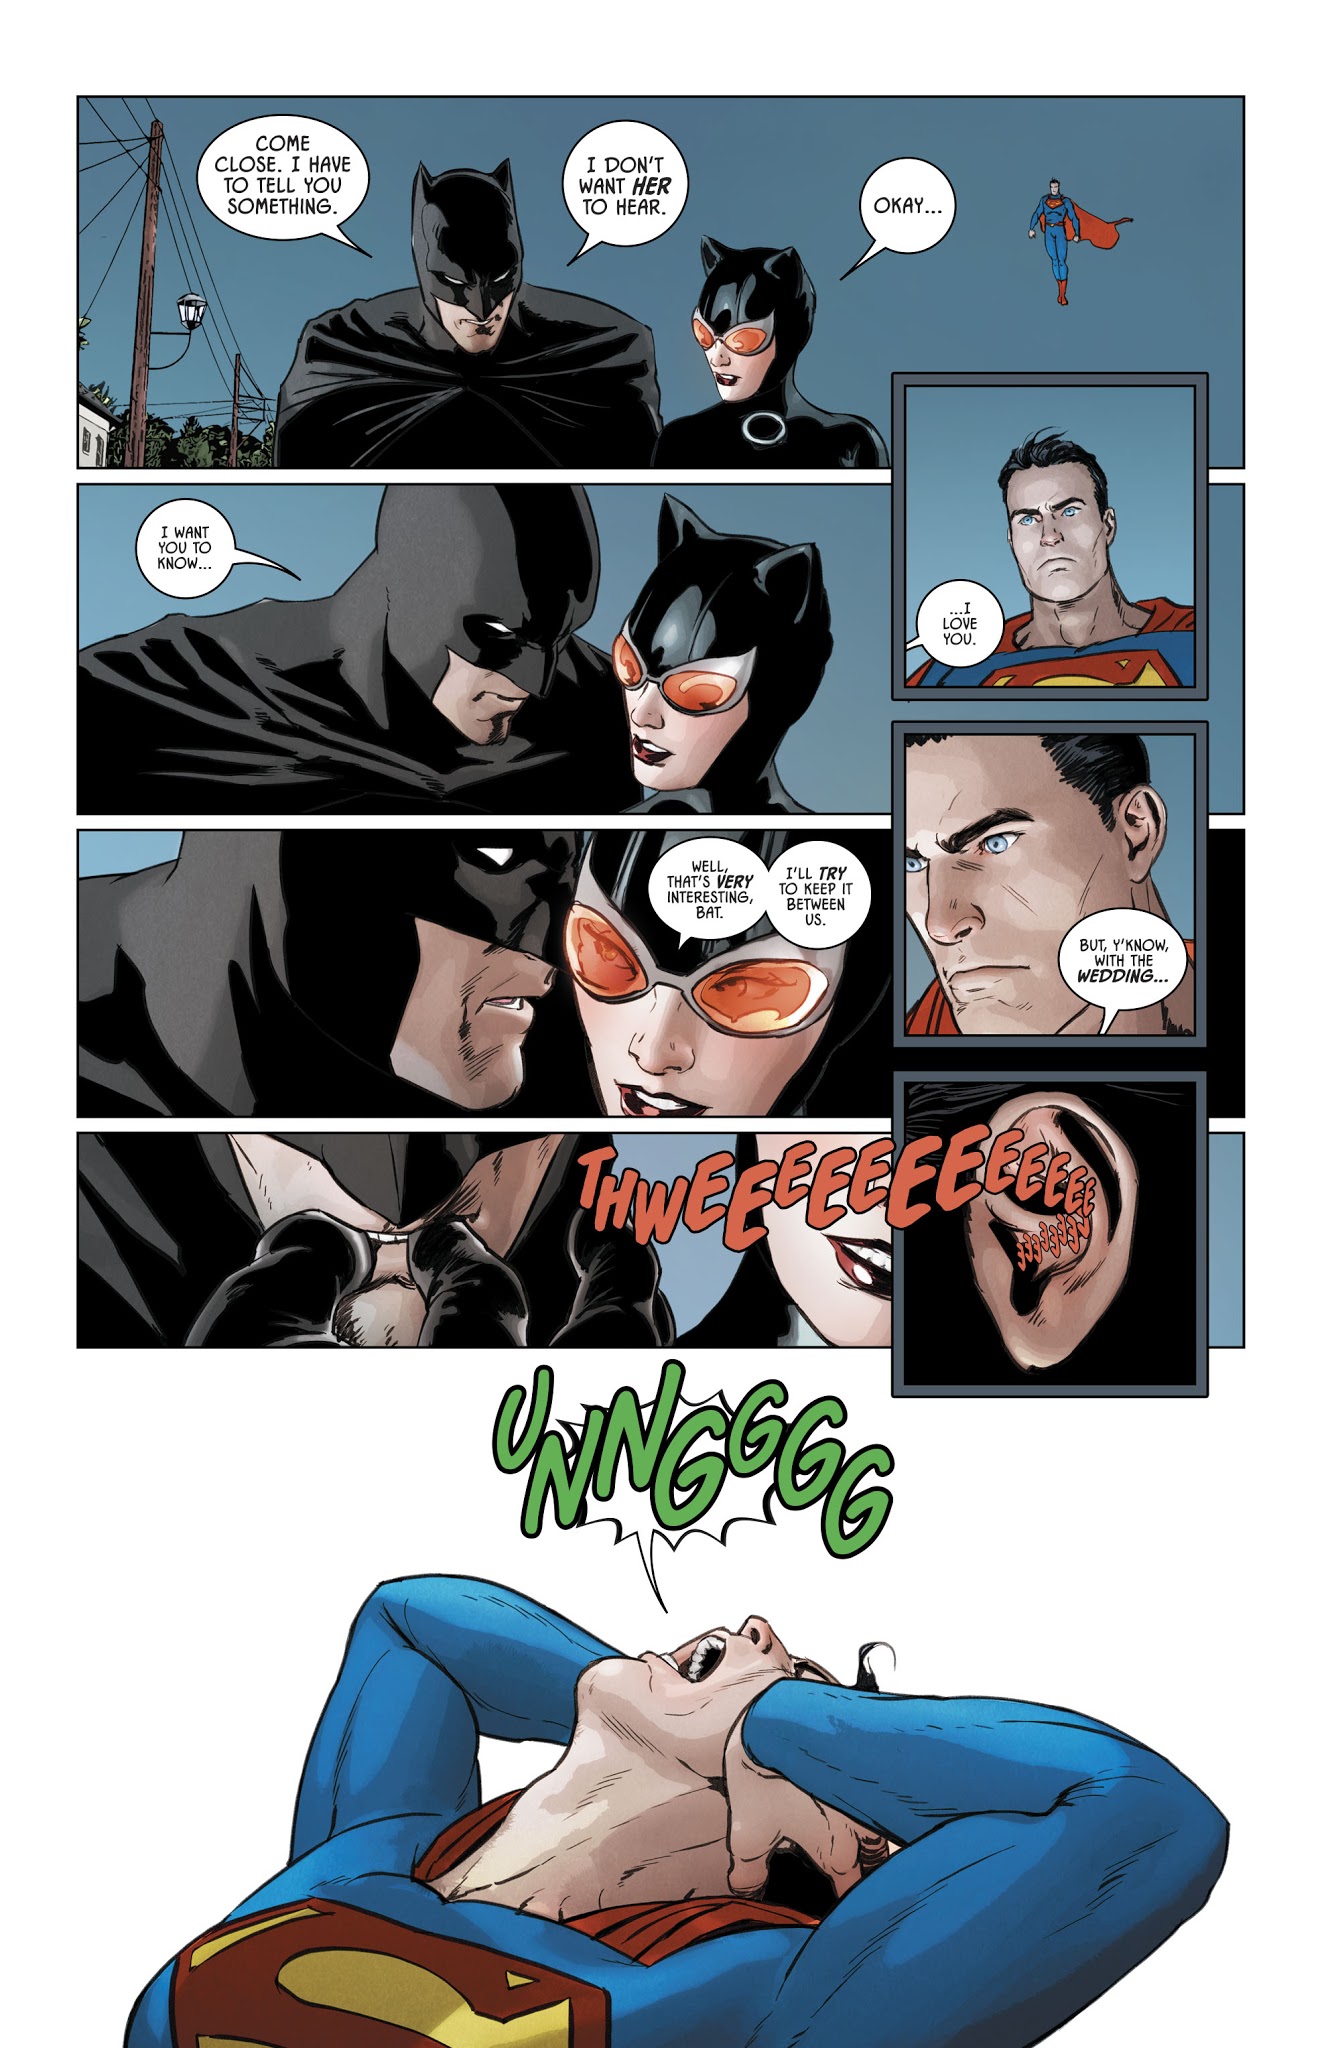 Batman Just Kicked Superman’s Arse In The Pettiest Way Possible